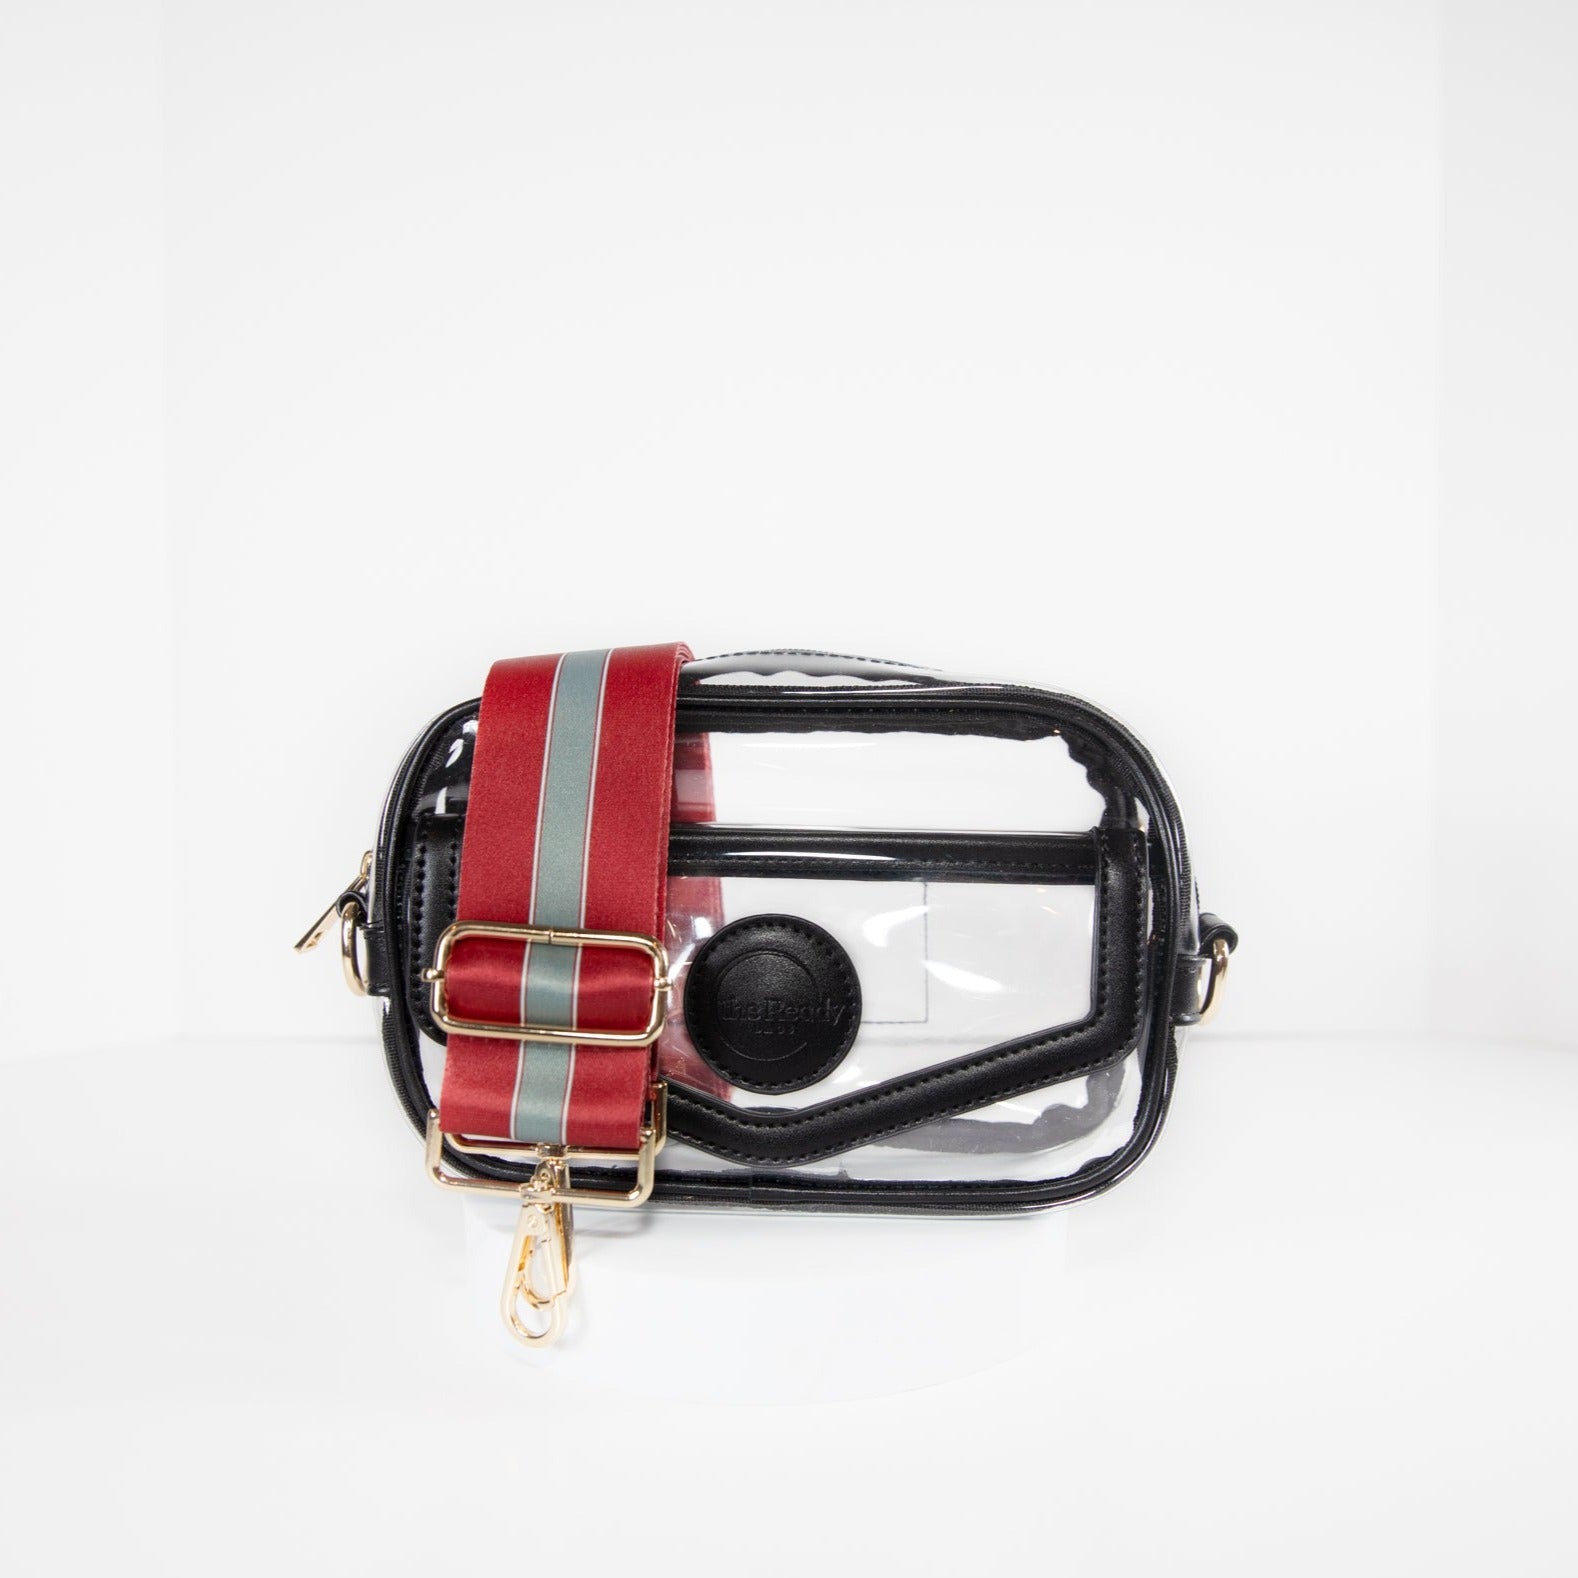 Clear stadium bag with black leather trim, front facing, with a crossbody strap in team colors of Alabama Crimson Tide.